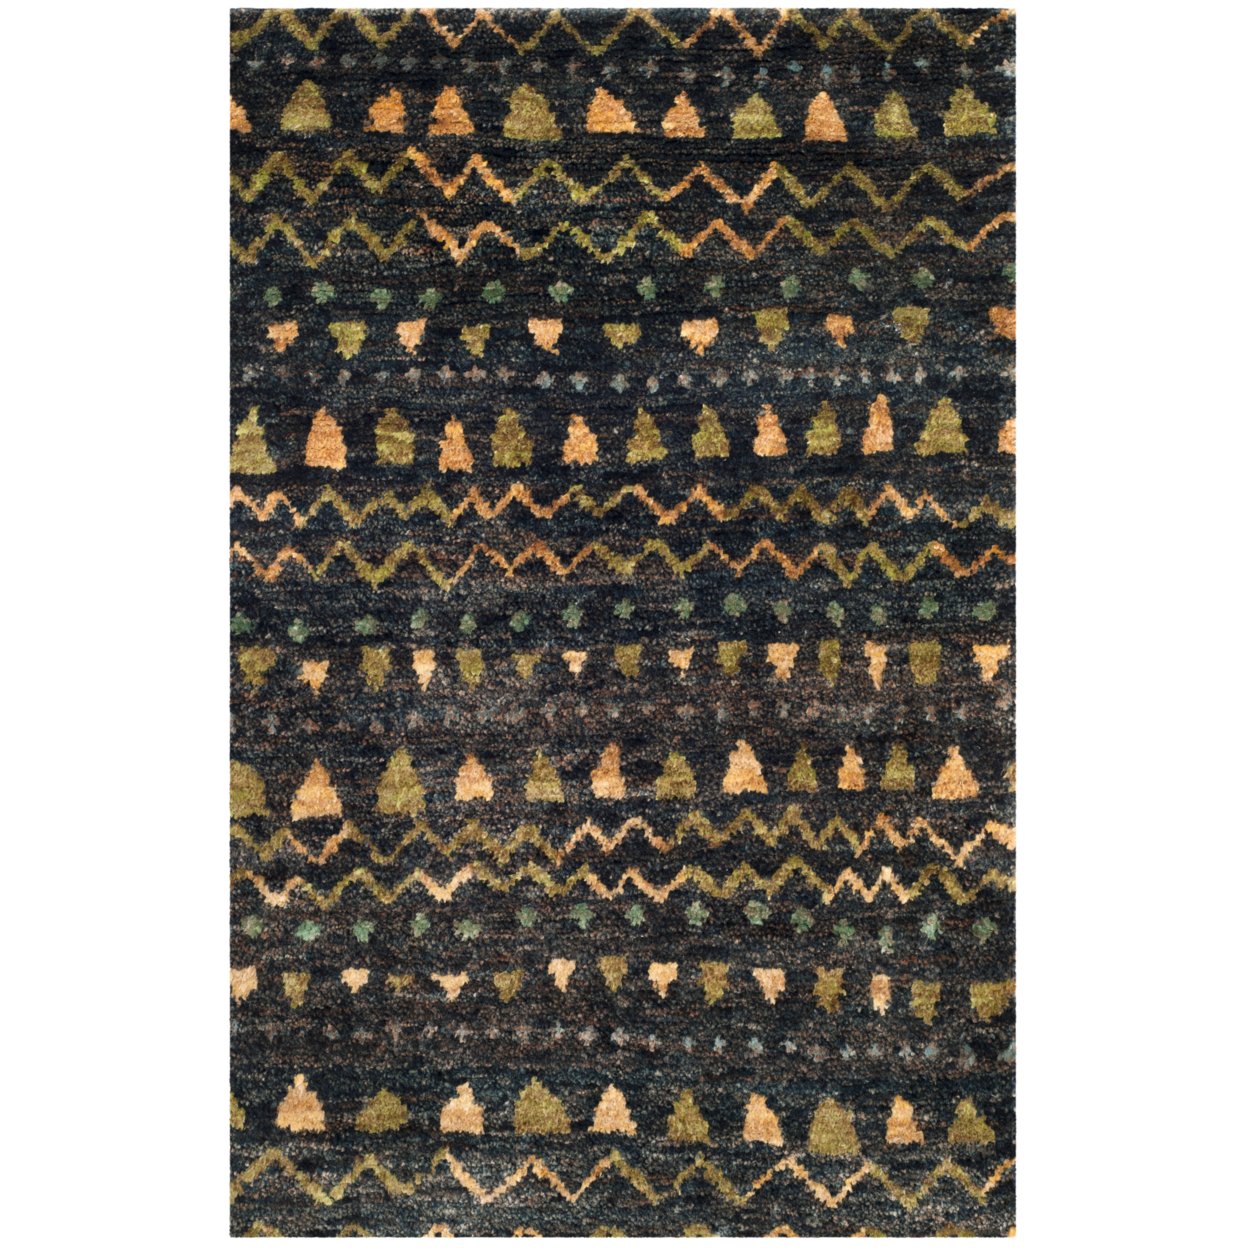 SAFAVIEH Bohemian BOH653A Hand-knotted Black / Gold Rug - 8' X 10'